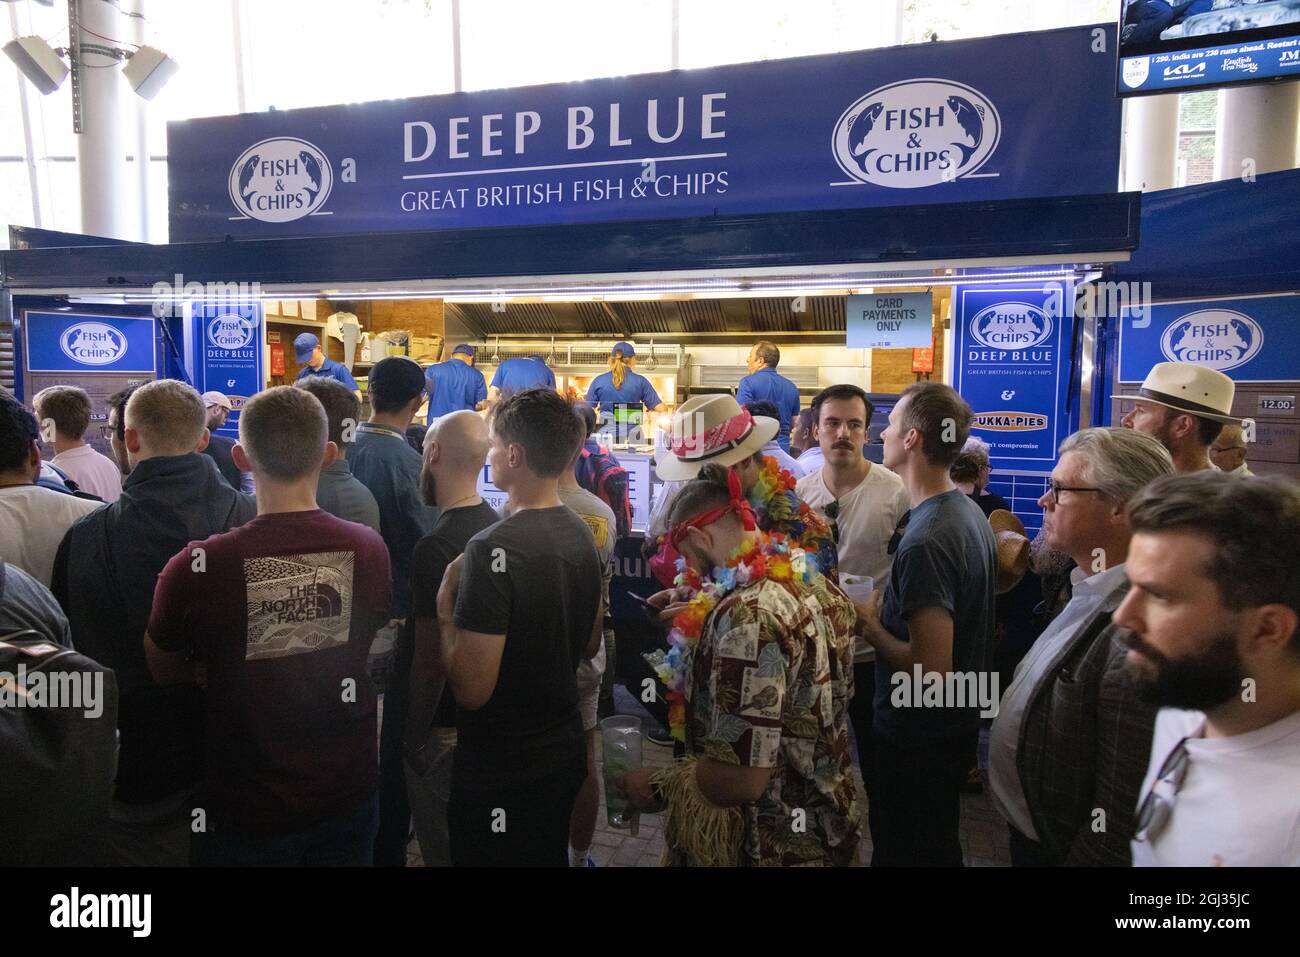 Deep Blue Fish & Chips stall at the Oval, Kennington London, serving fish and chips to a crowd of people, London UK Stock Photo